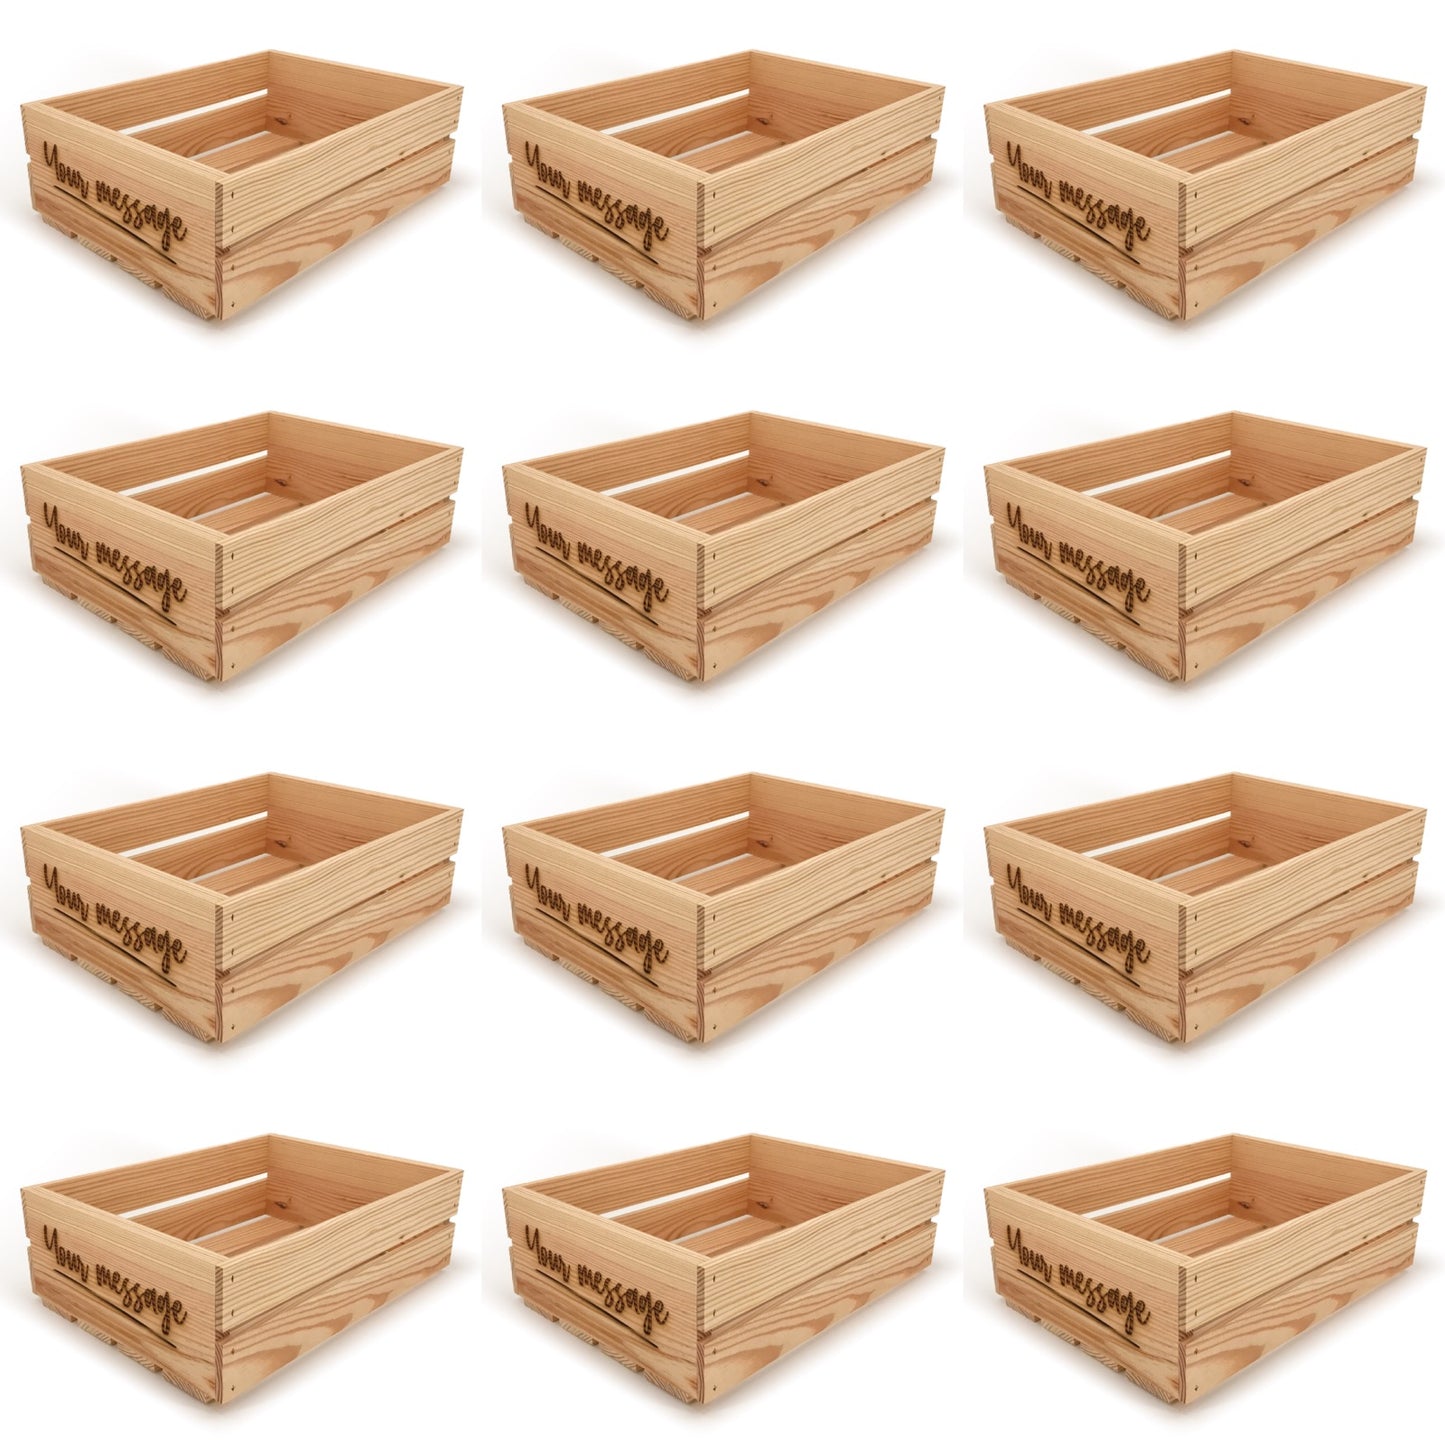 12 Small wooden crates with custom message 16x12x5.25